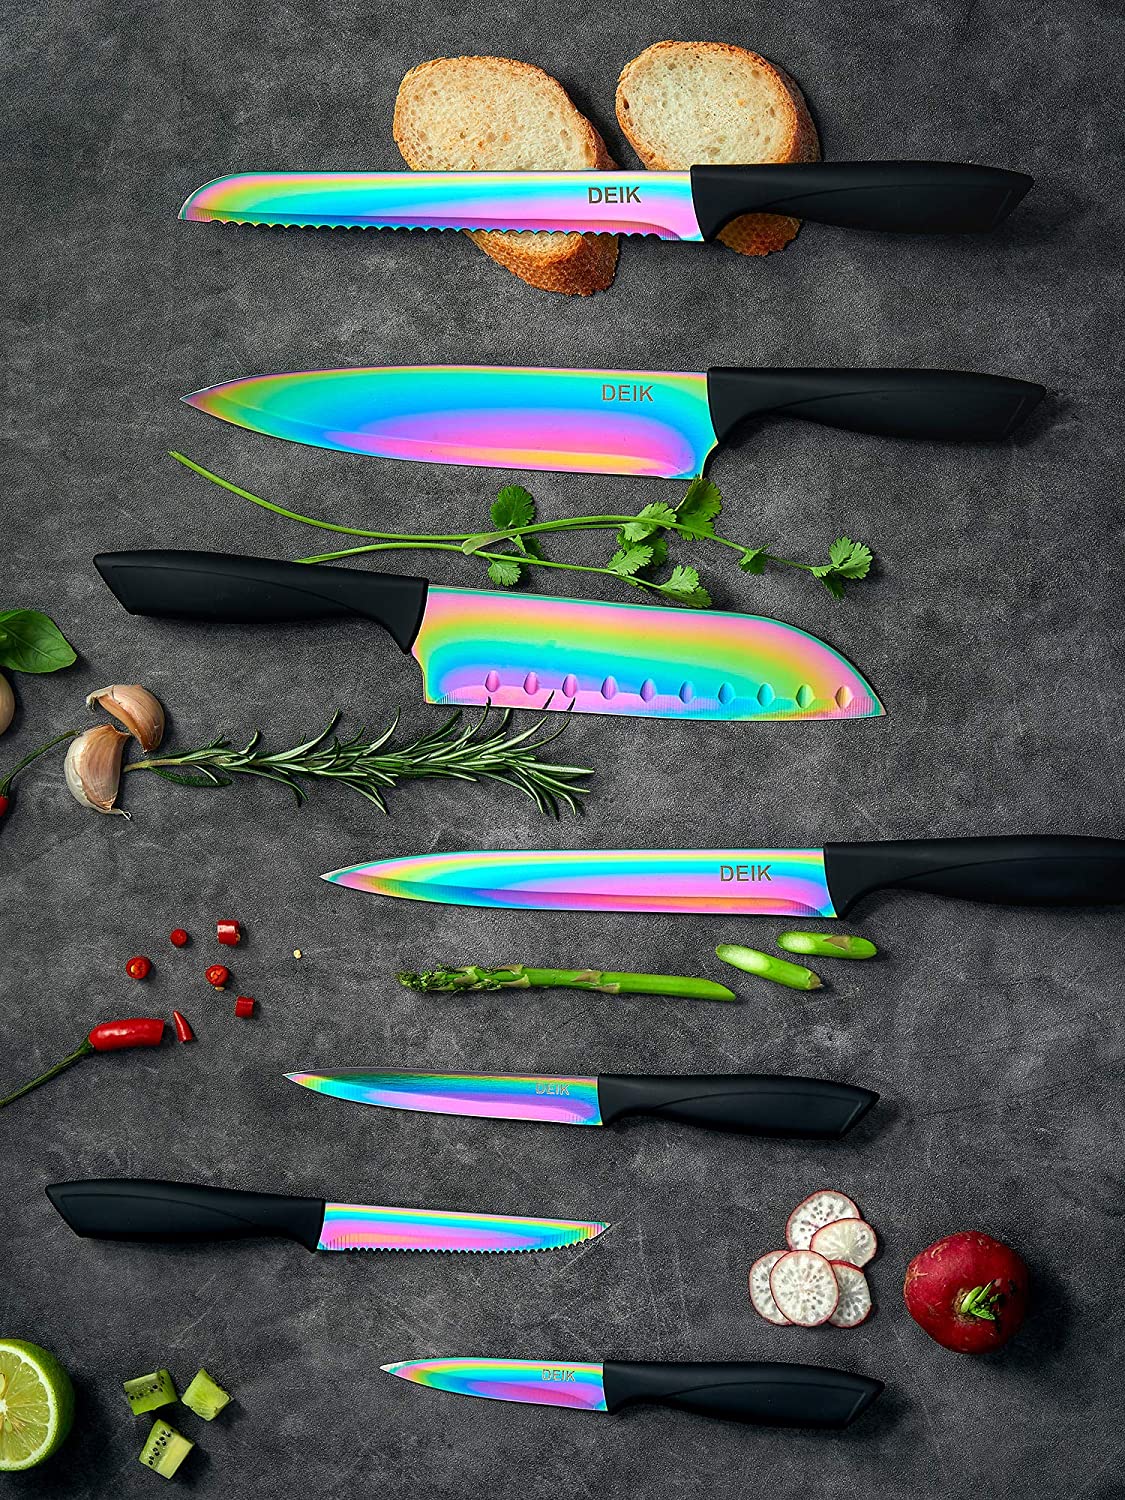 Aiheal Knife Set, 16 Pieces High Carbon Stainless Steel Rainbow Color  Kitchen